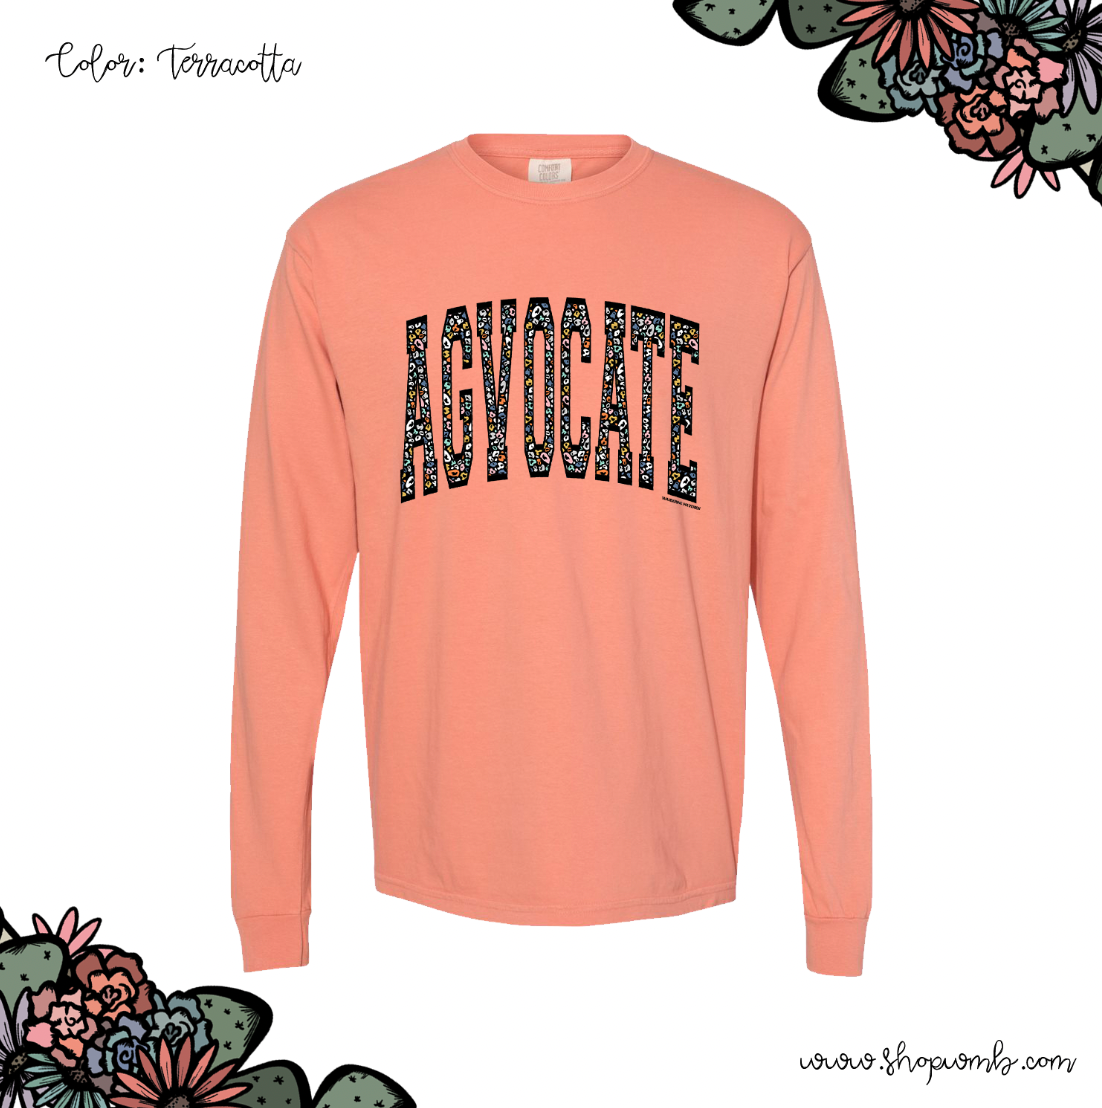 Colorful Cheetah Agvocate LONG SLEEVE T-Shirt (S-3XL) - Multiple Colors!